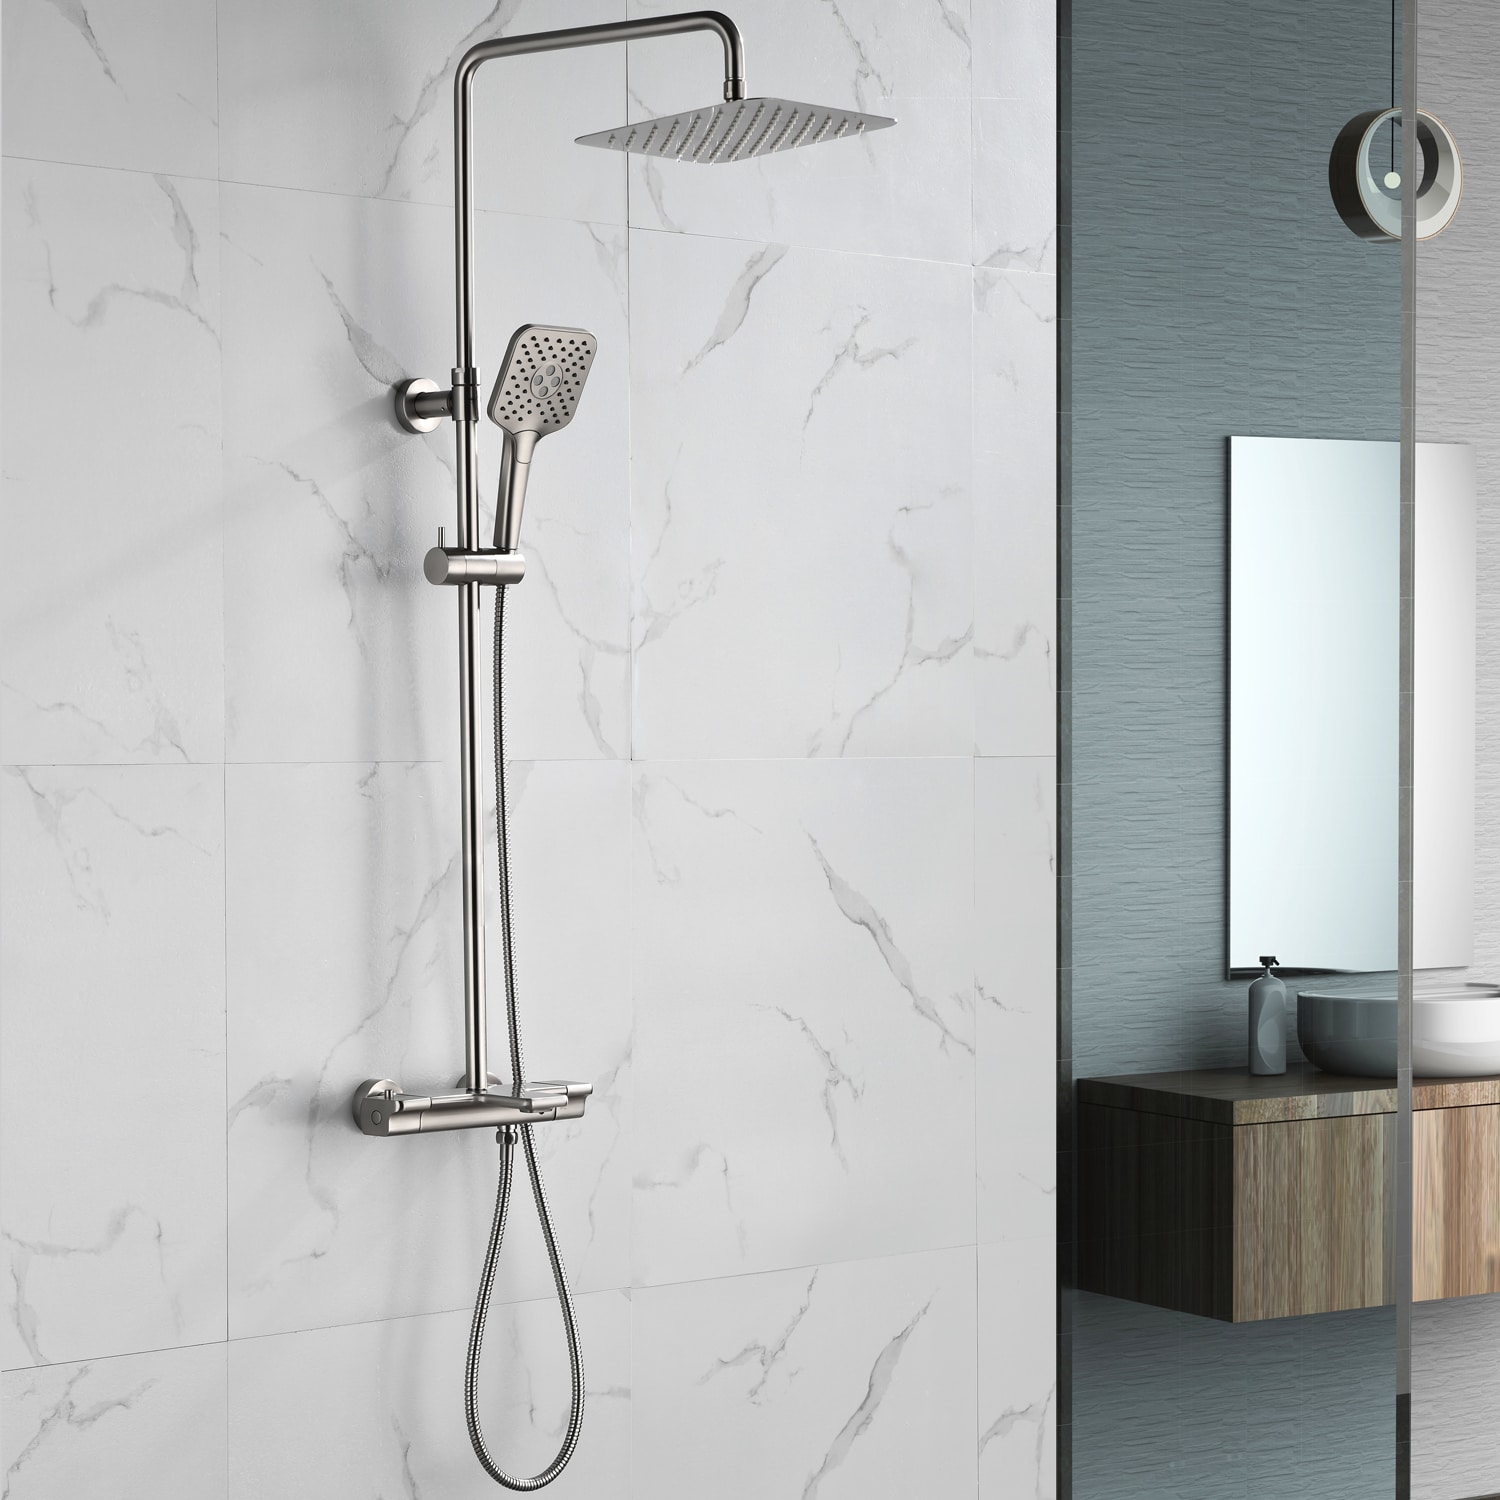 Pouuin Ob Brushed Nickel Waterfall Shower Faucet Bar System with 4-way Diverter Valve Included